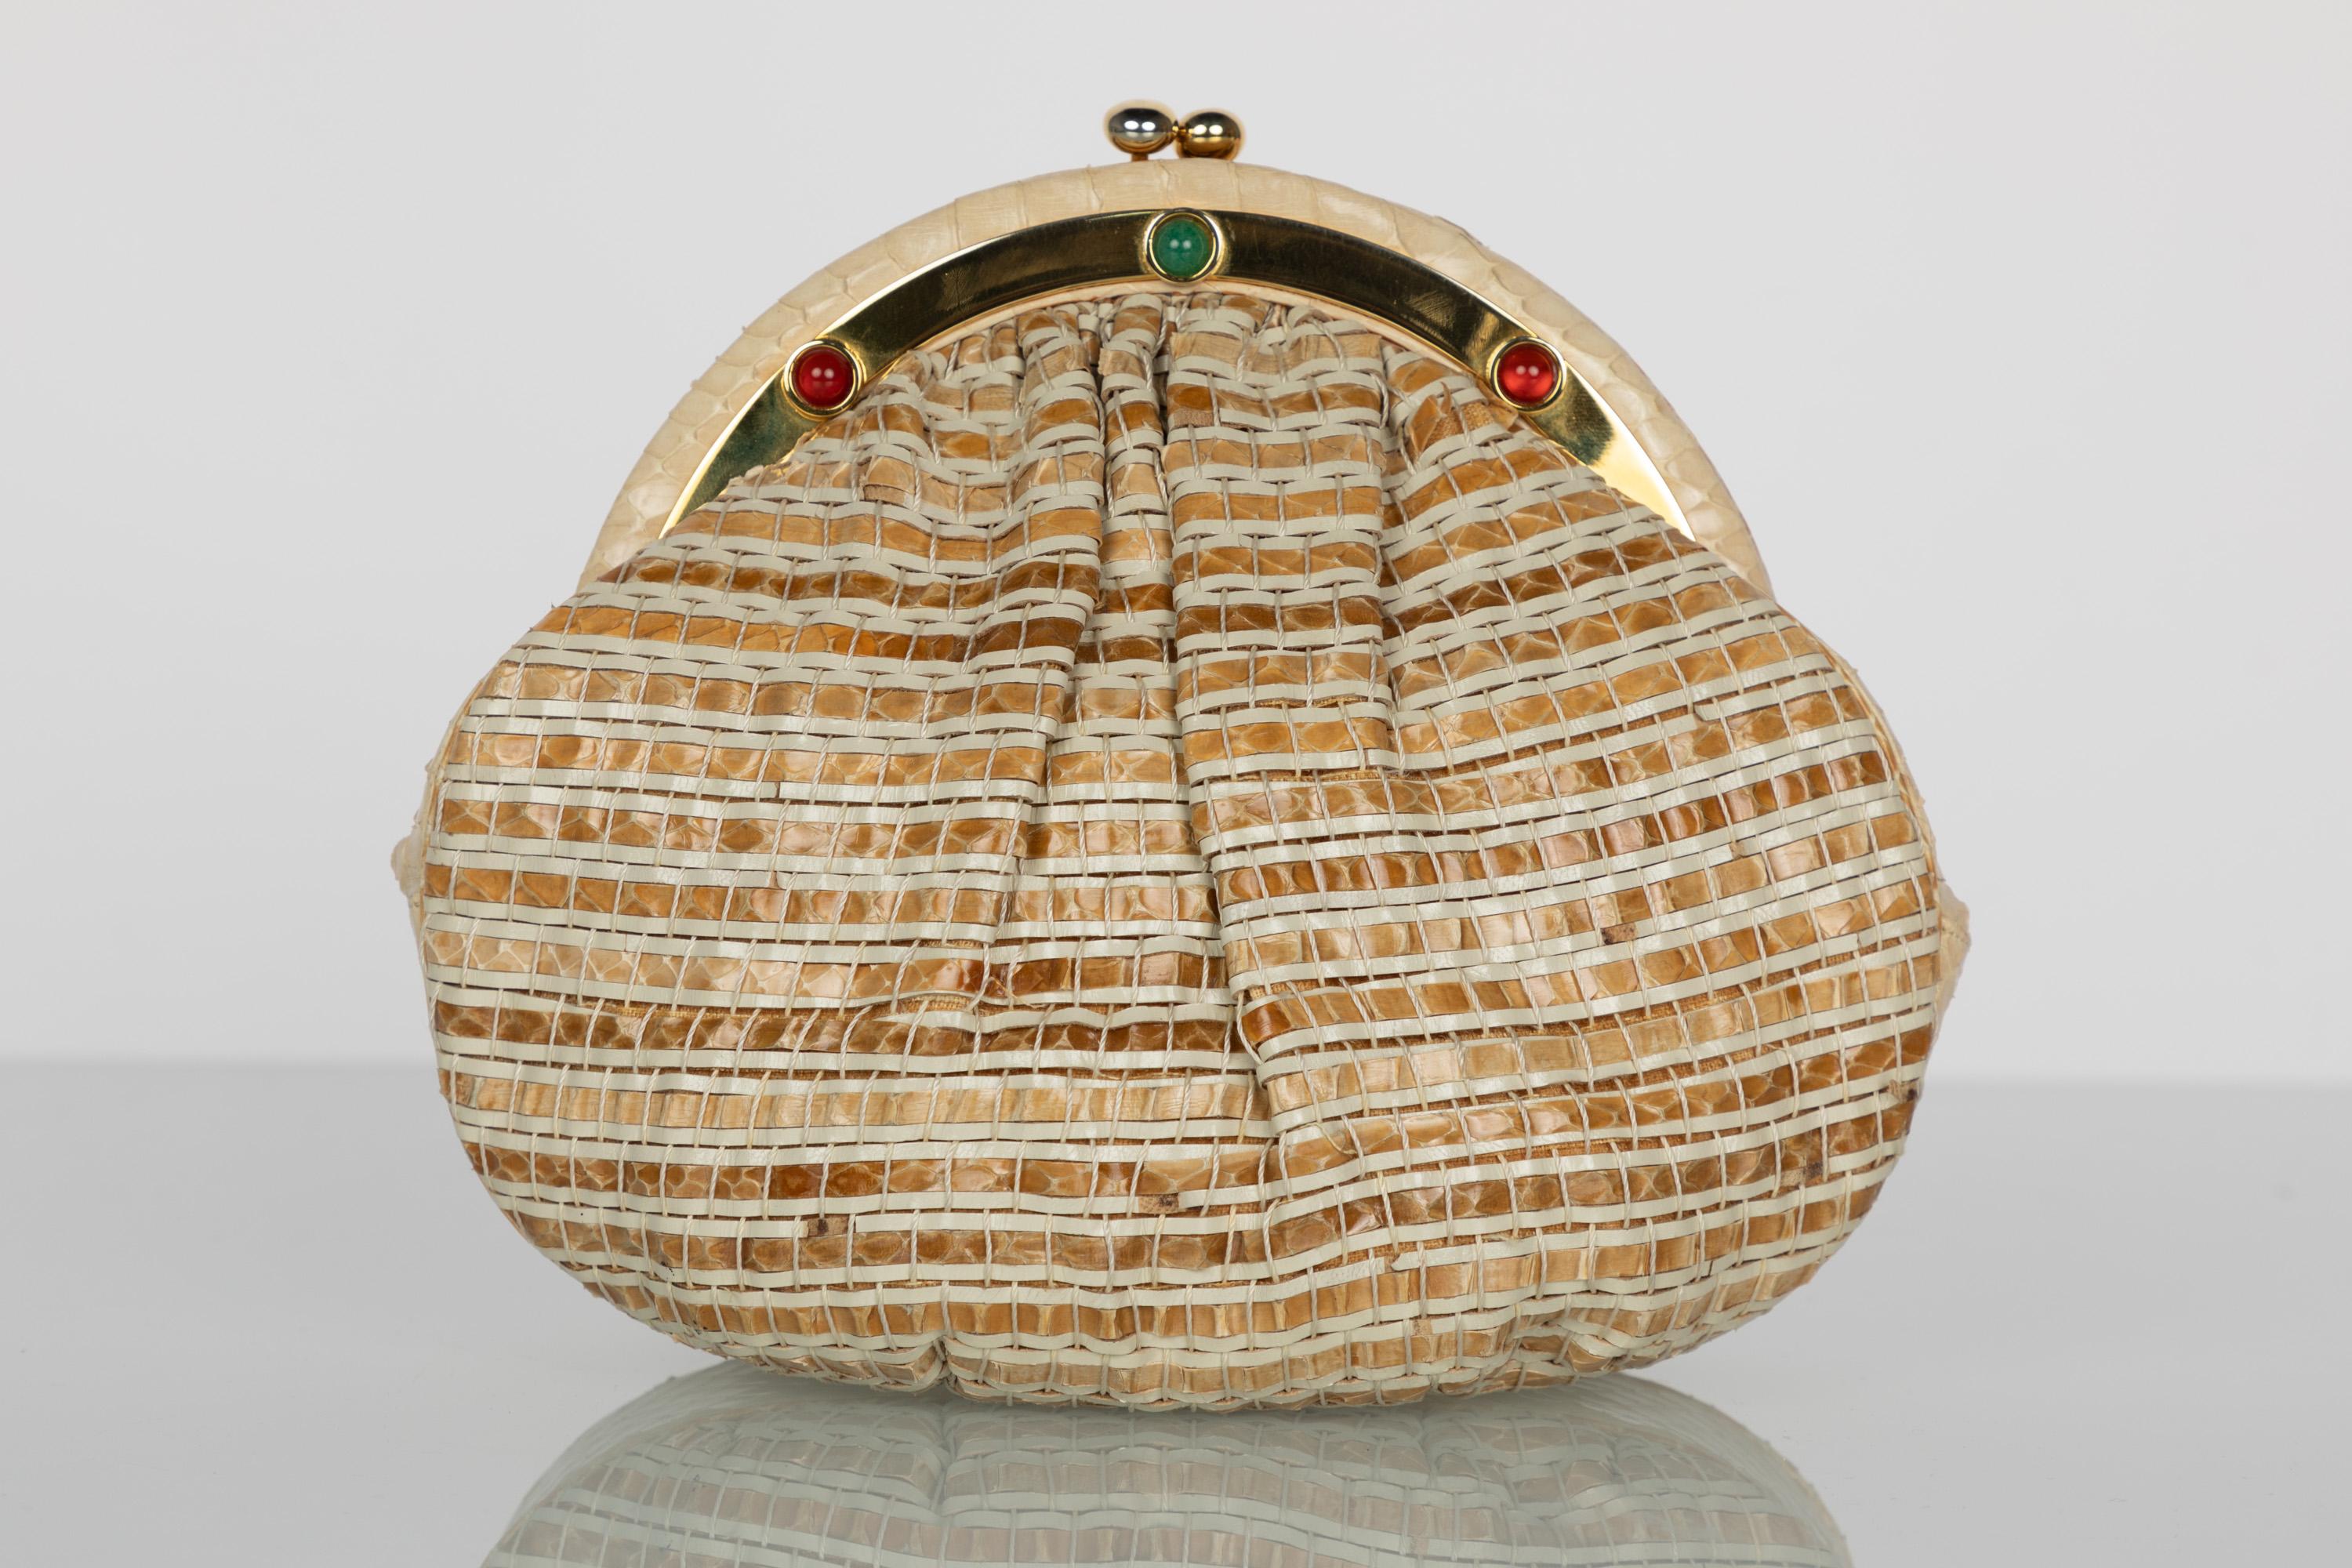 While Judith Leiber is often highlighted for her over-the-top, jewel encrusted, novelty bags, her earlier work represents a different creative sensibility. Through careful selection of textures, craft techniques, and materials, Judith Leiber’s early